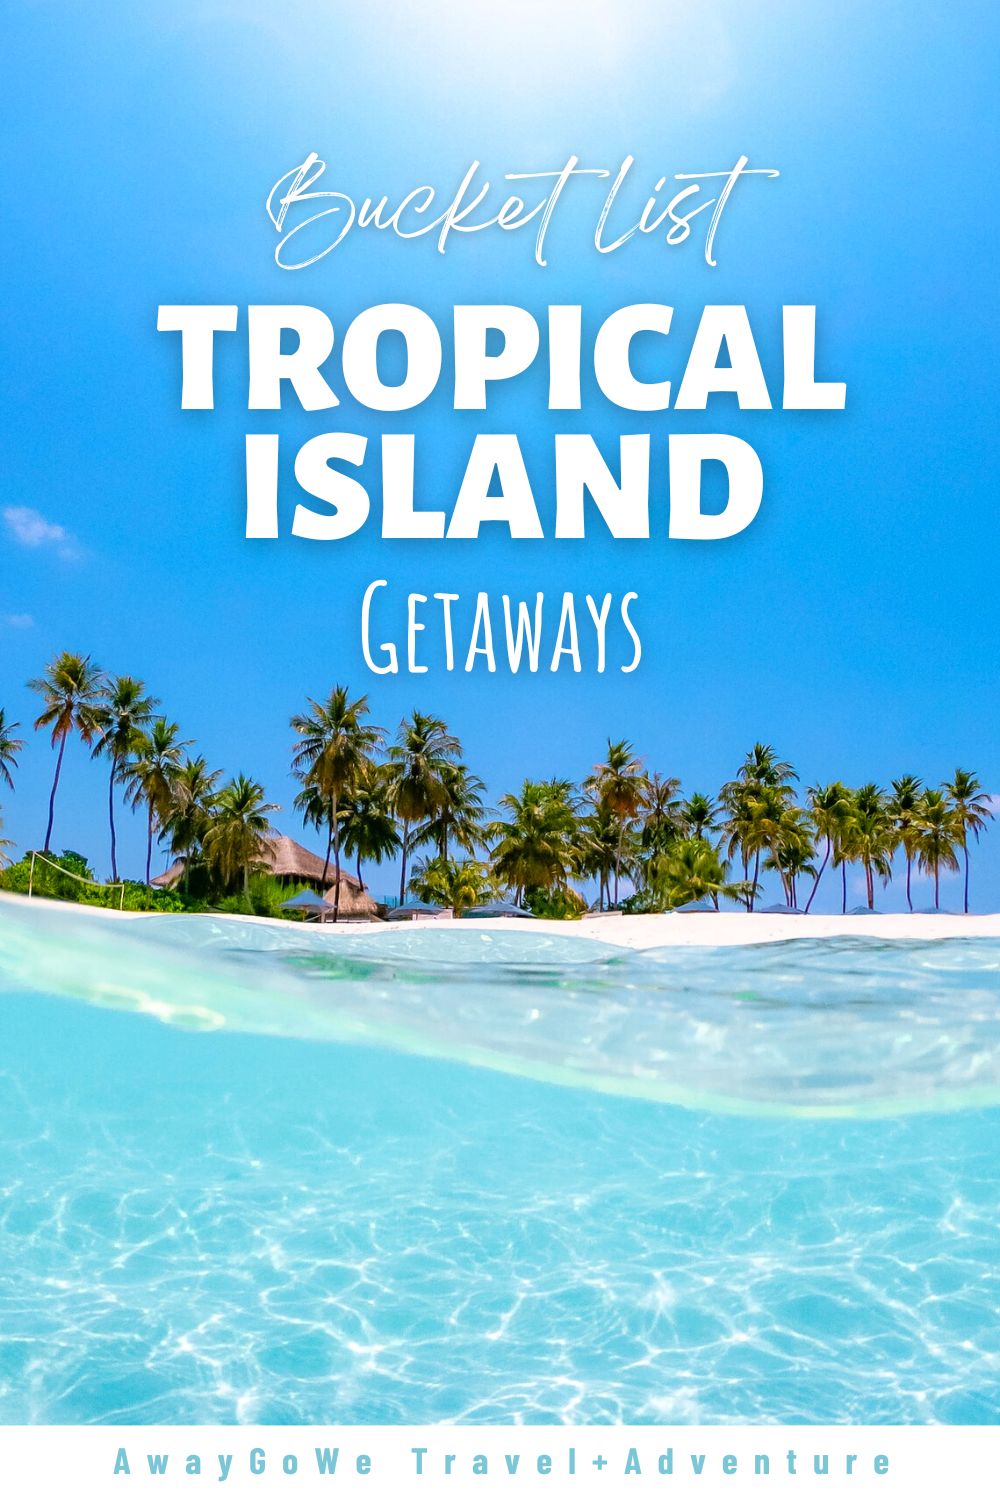 tropical island resorts for your bucket list